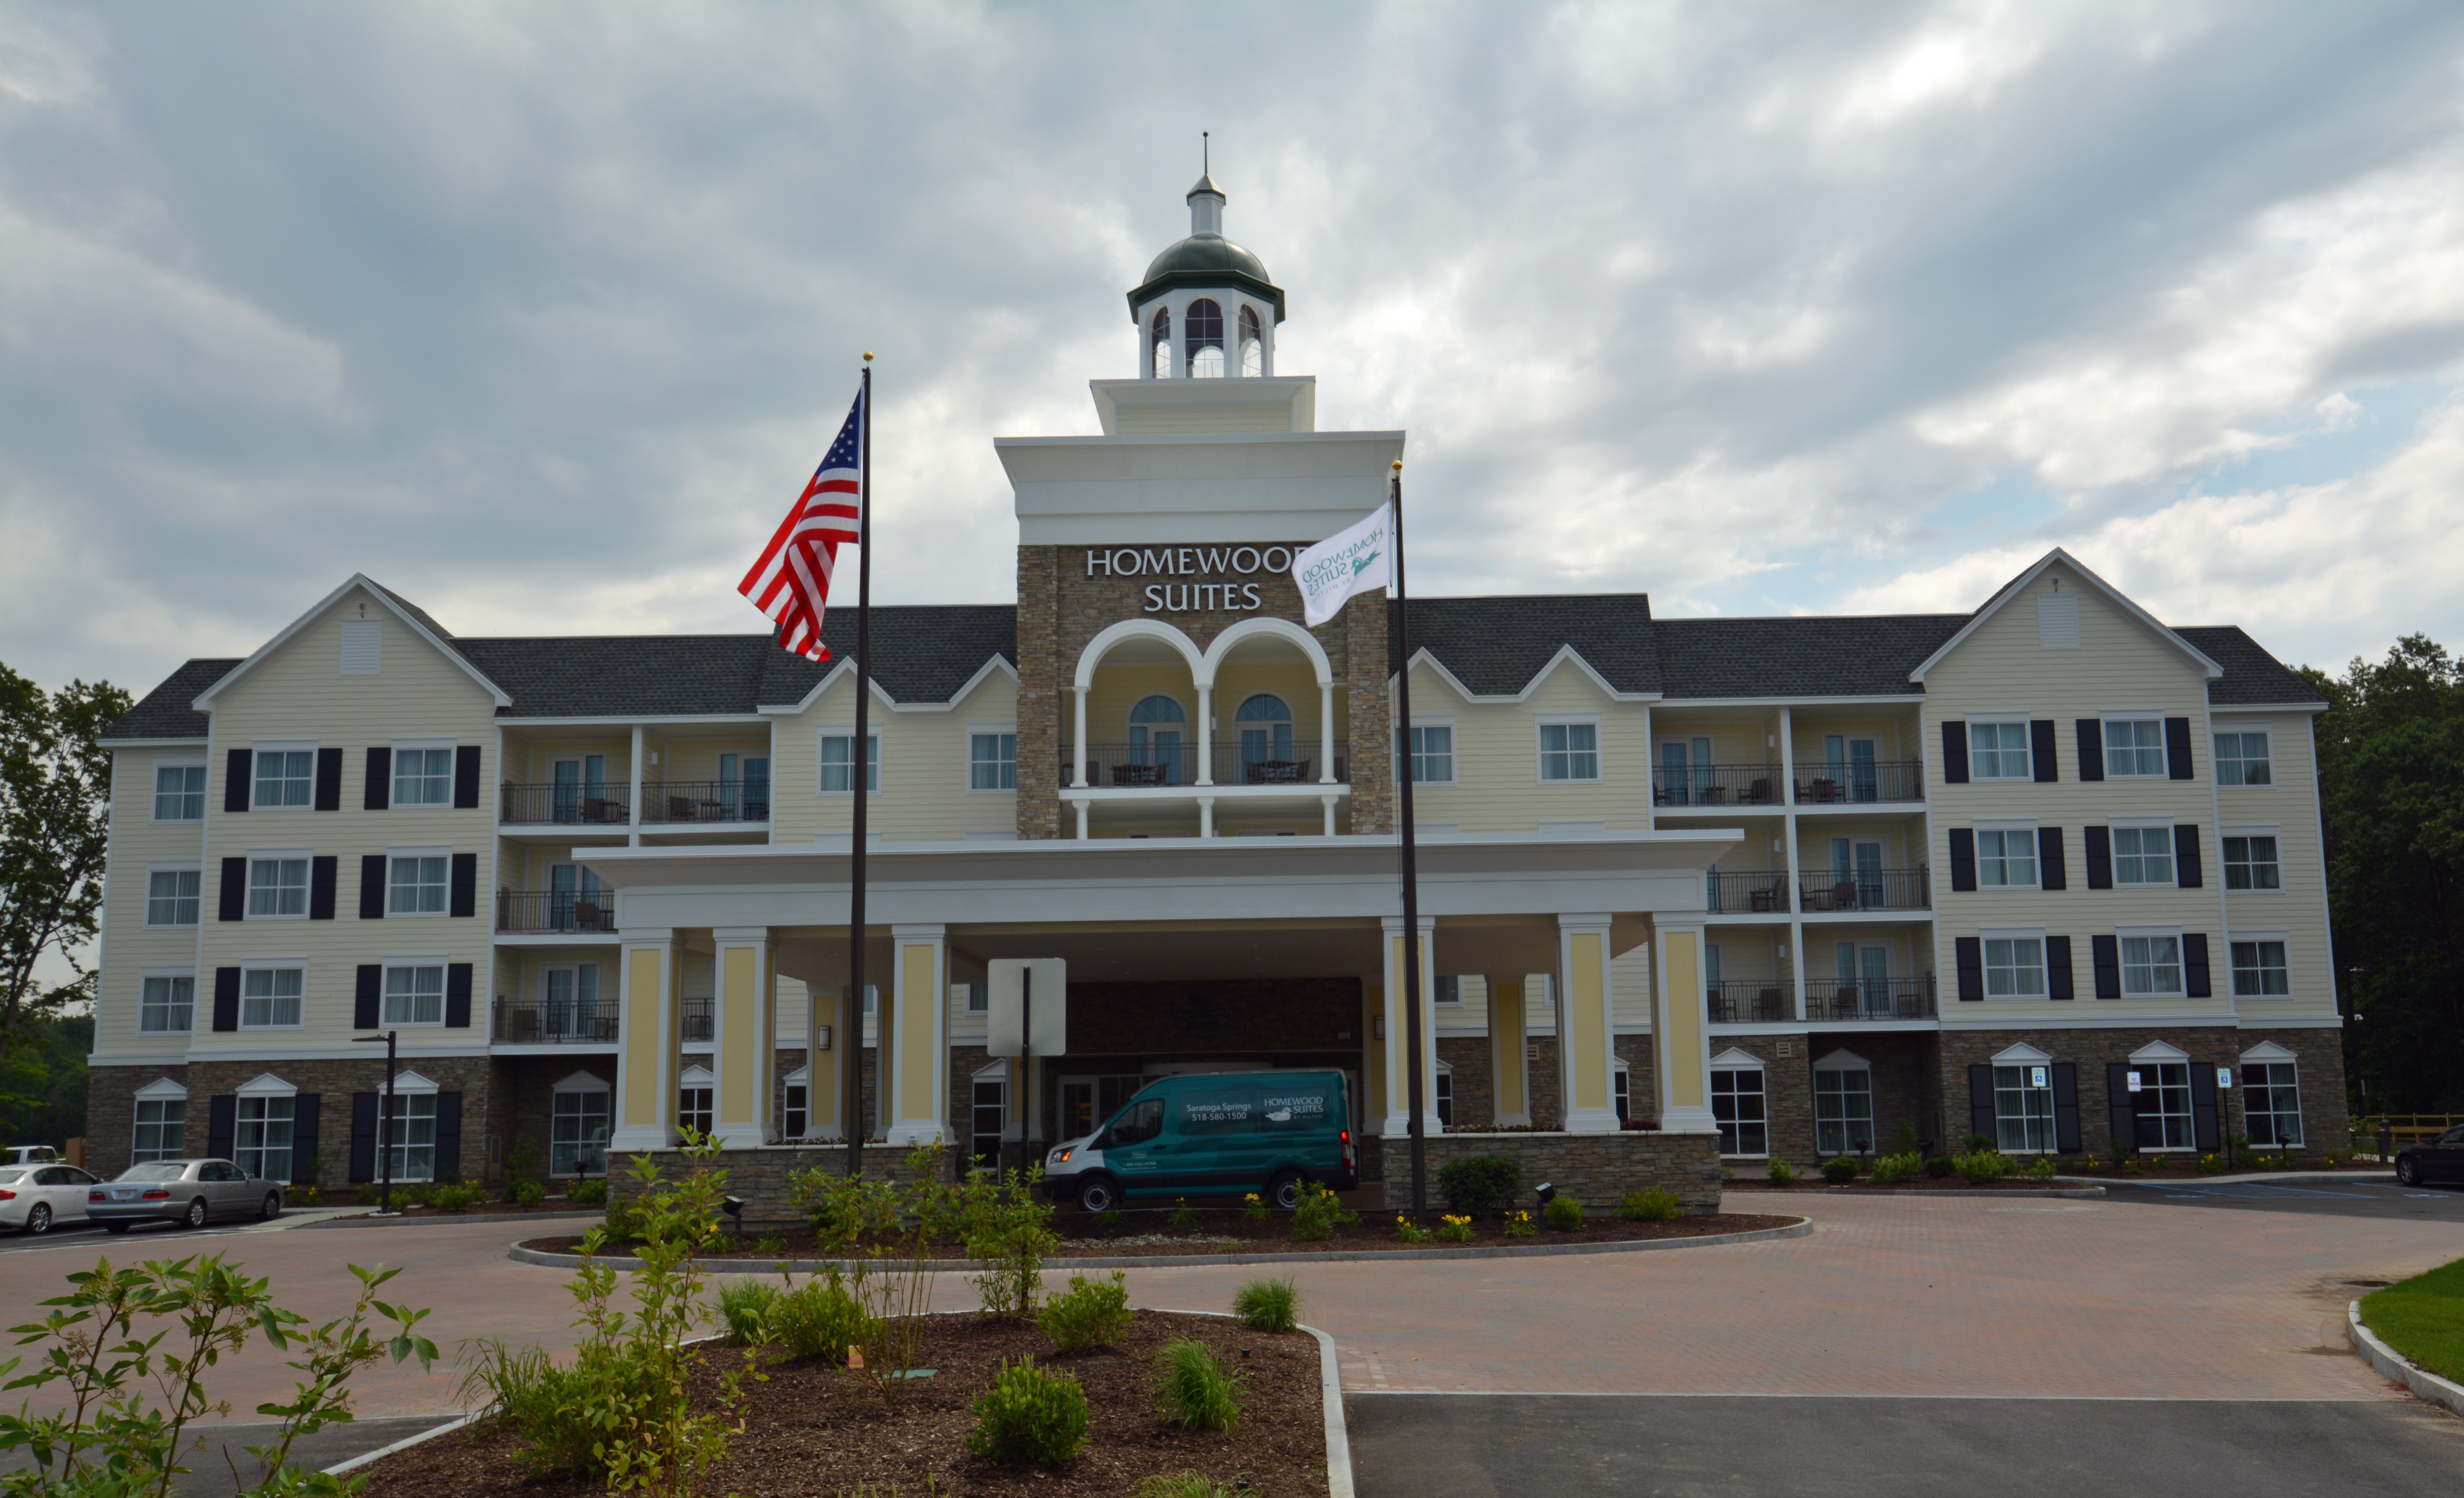 Homewood Suites by Hilton Saratoga Springs - Hotel Exterior Daytime